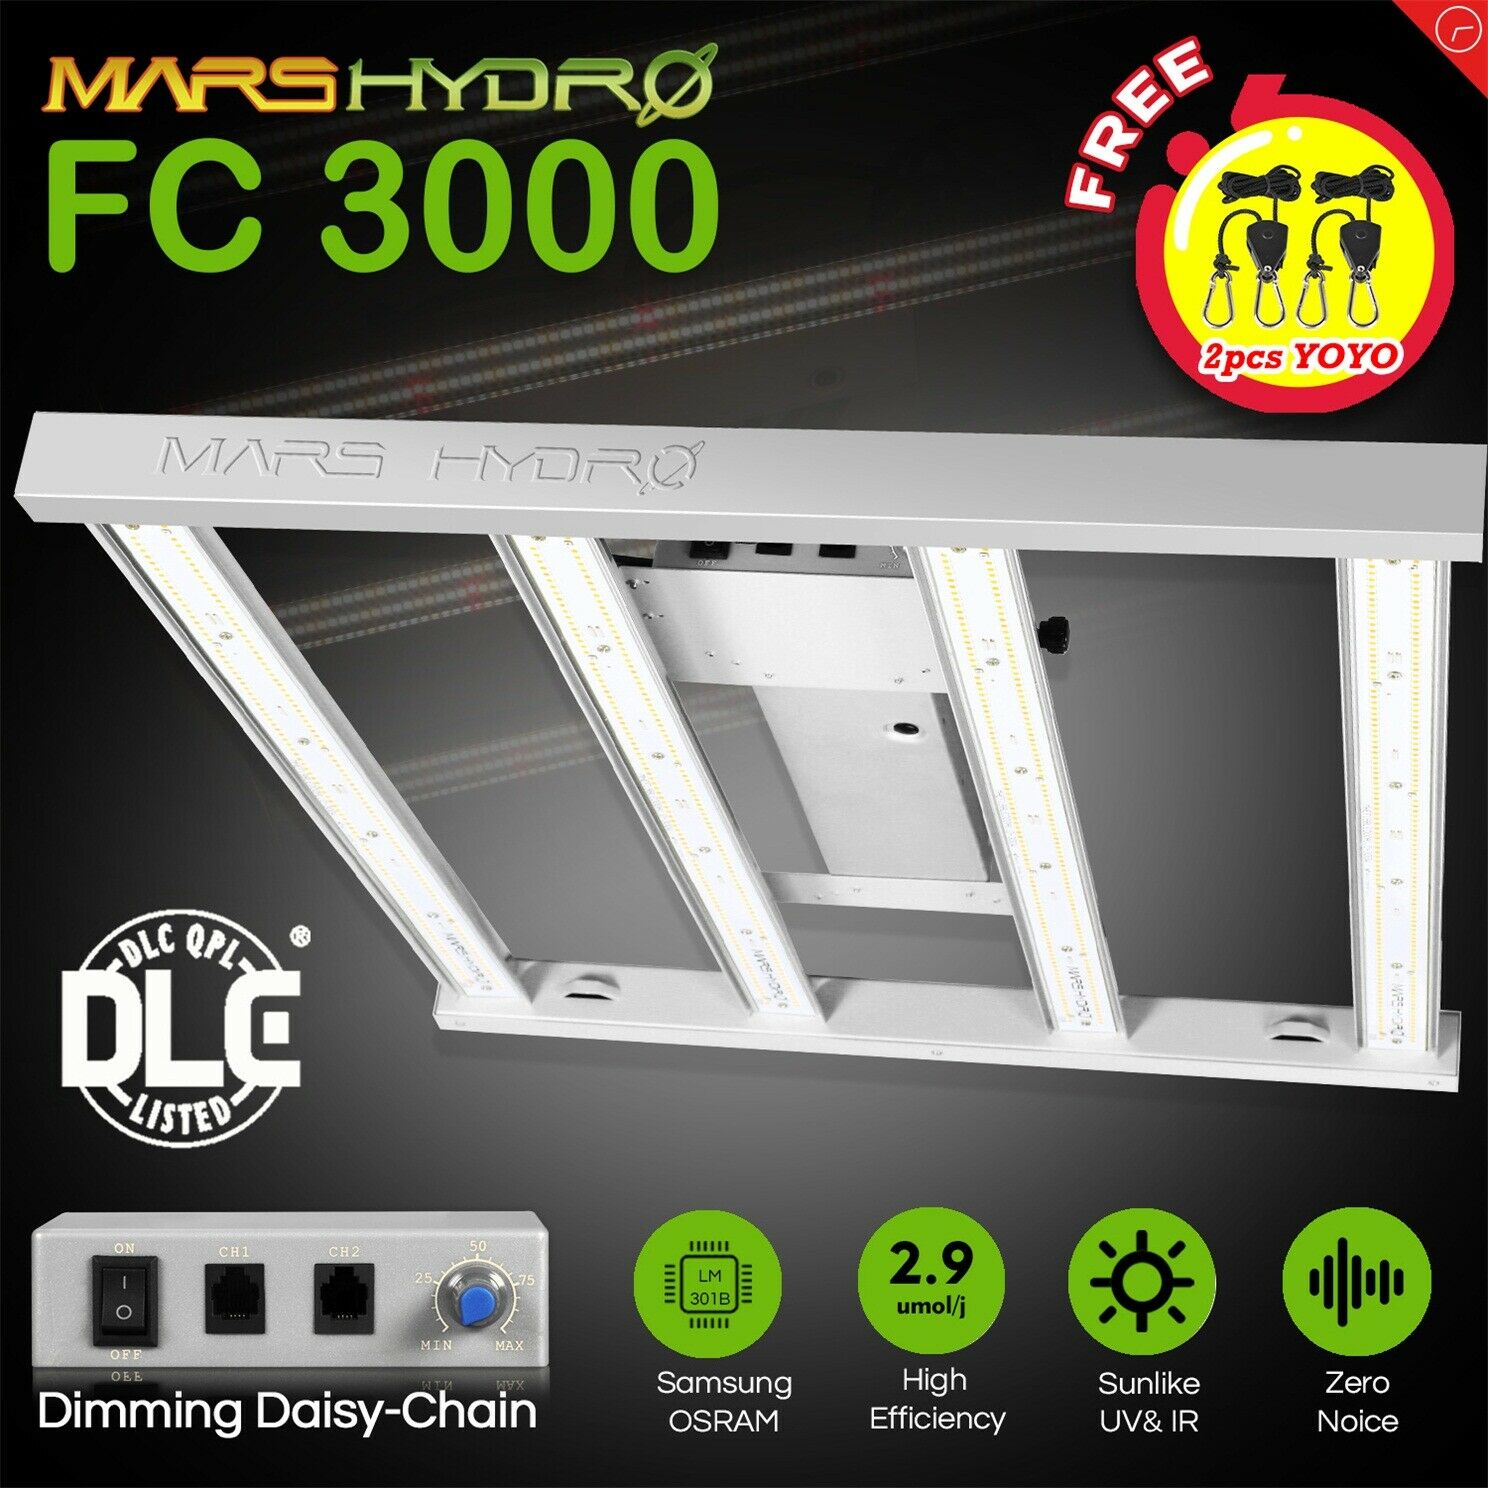 New Designed 2020 Mars Hydro FC 3000 Led Grow Light Full Spectrum Samsung LM301B Osram Diodes Meanwell Driver Hydroponic Commercial Greenhouse Grow 3x3ft 300W